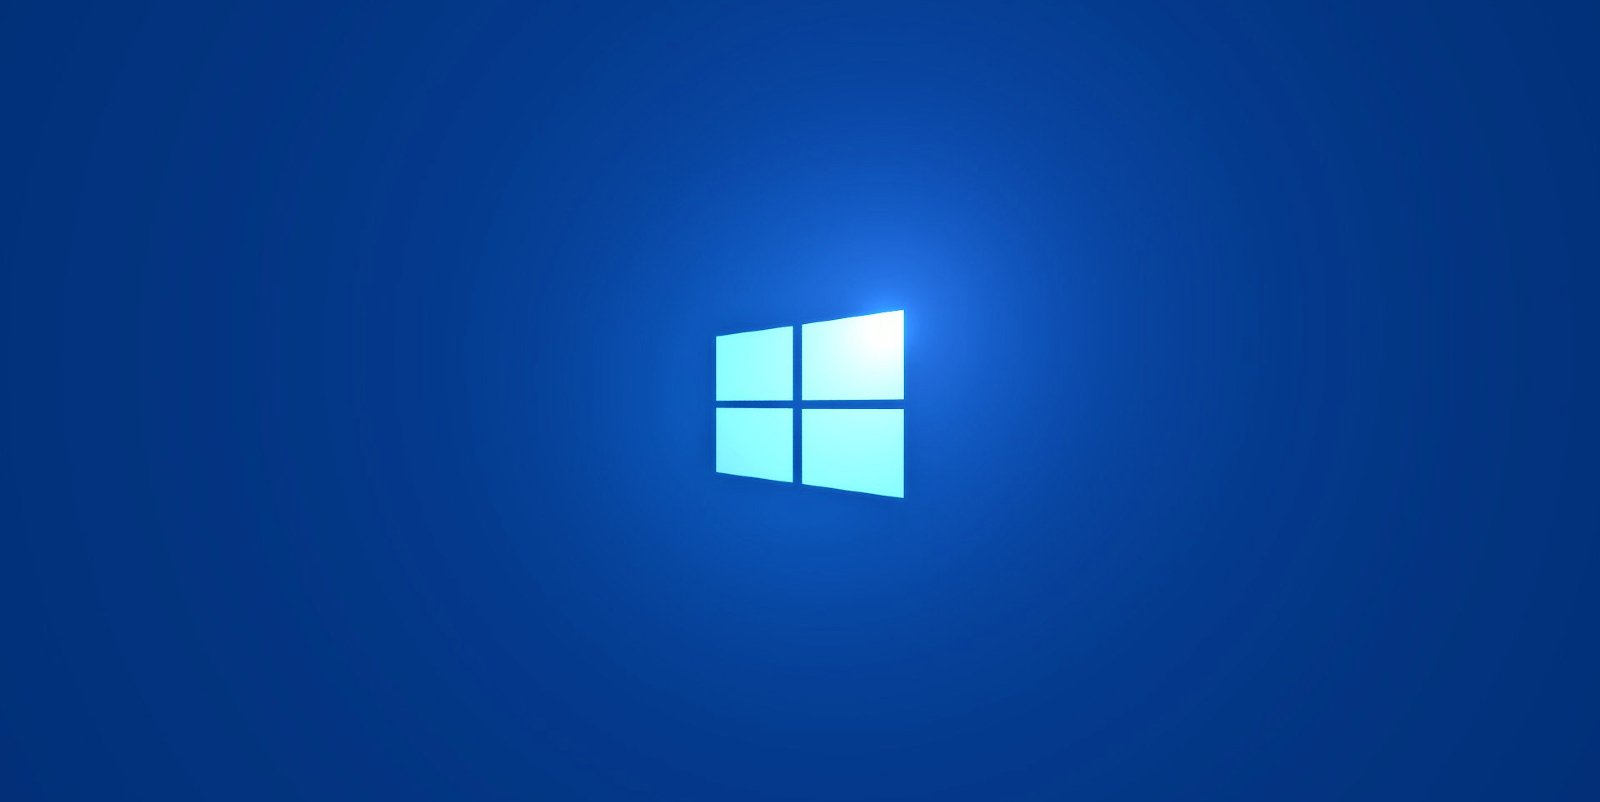 Windows 10 20H2 reaches end of service next month